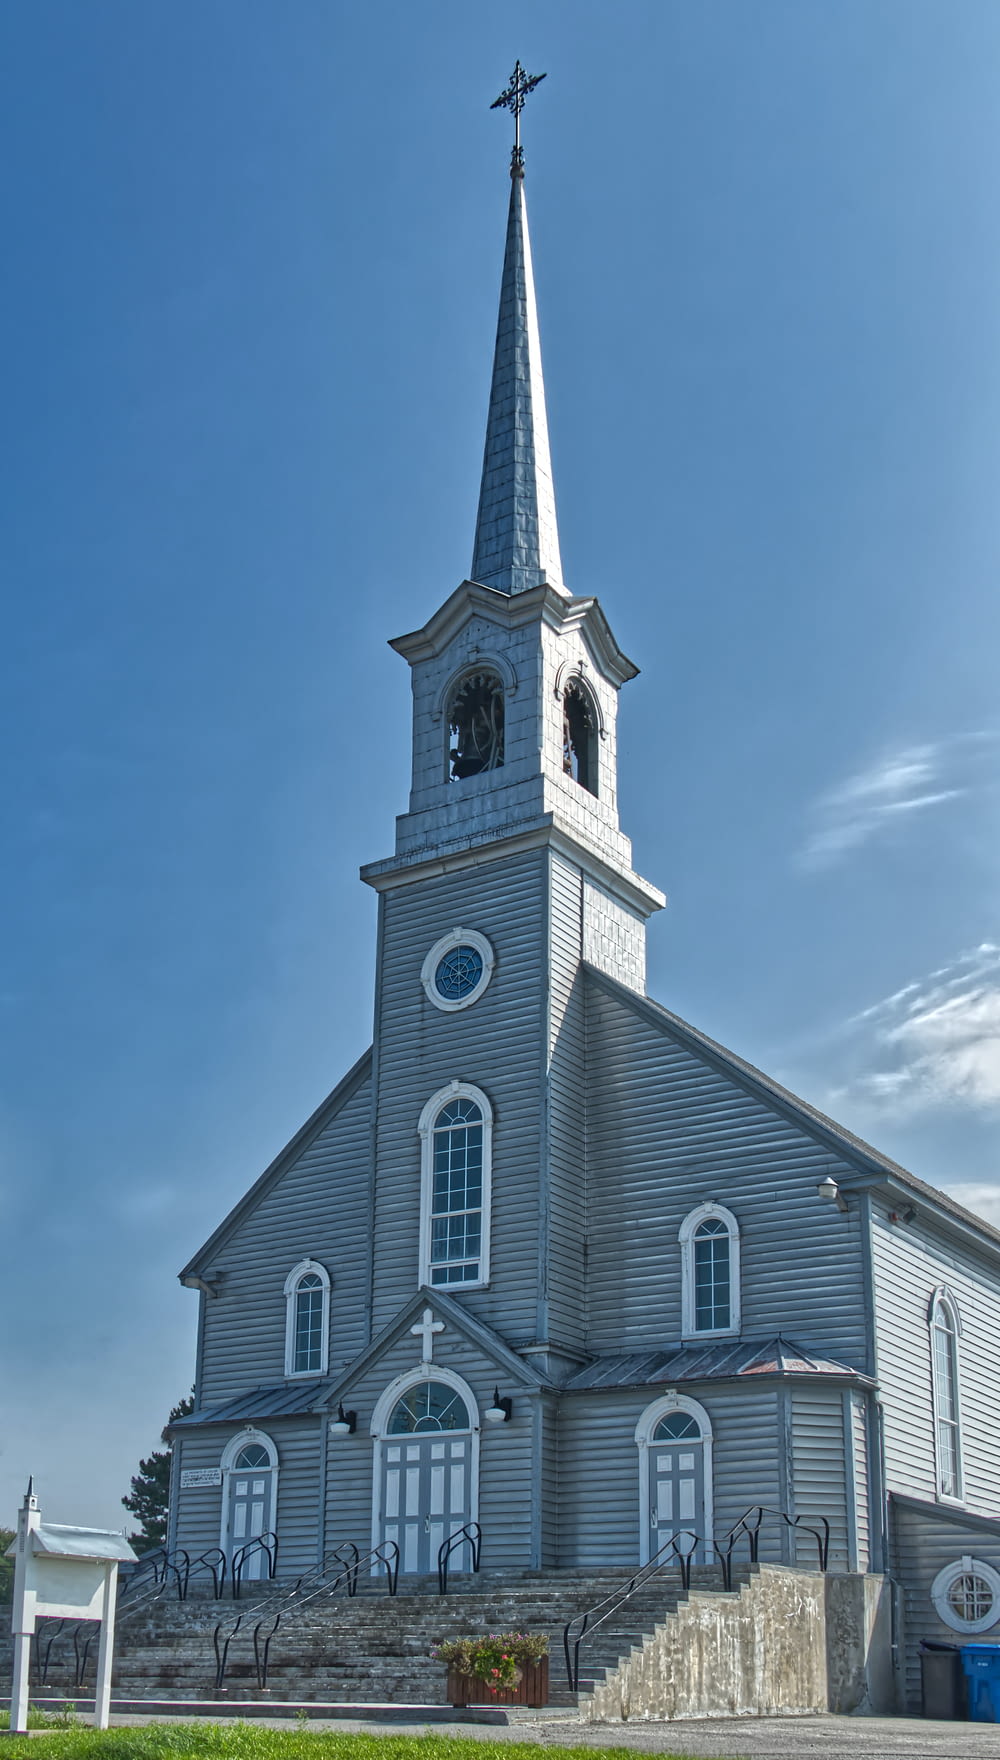 a church with a steeple and a clock tower